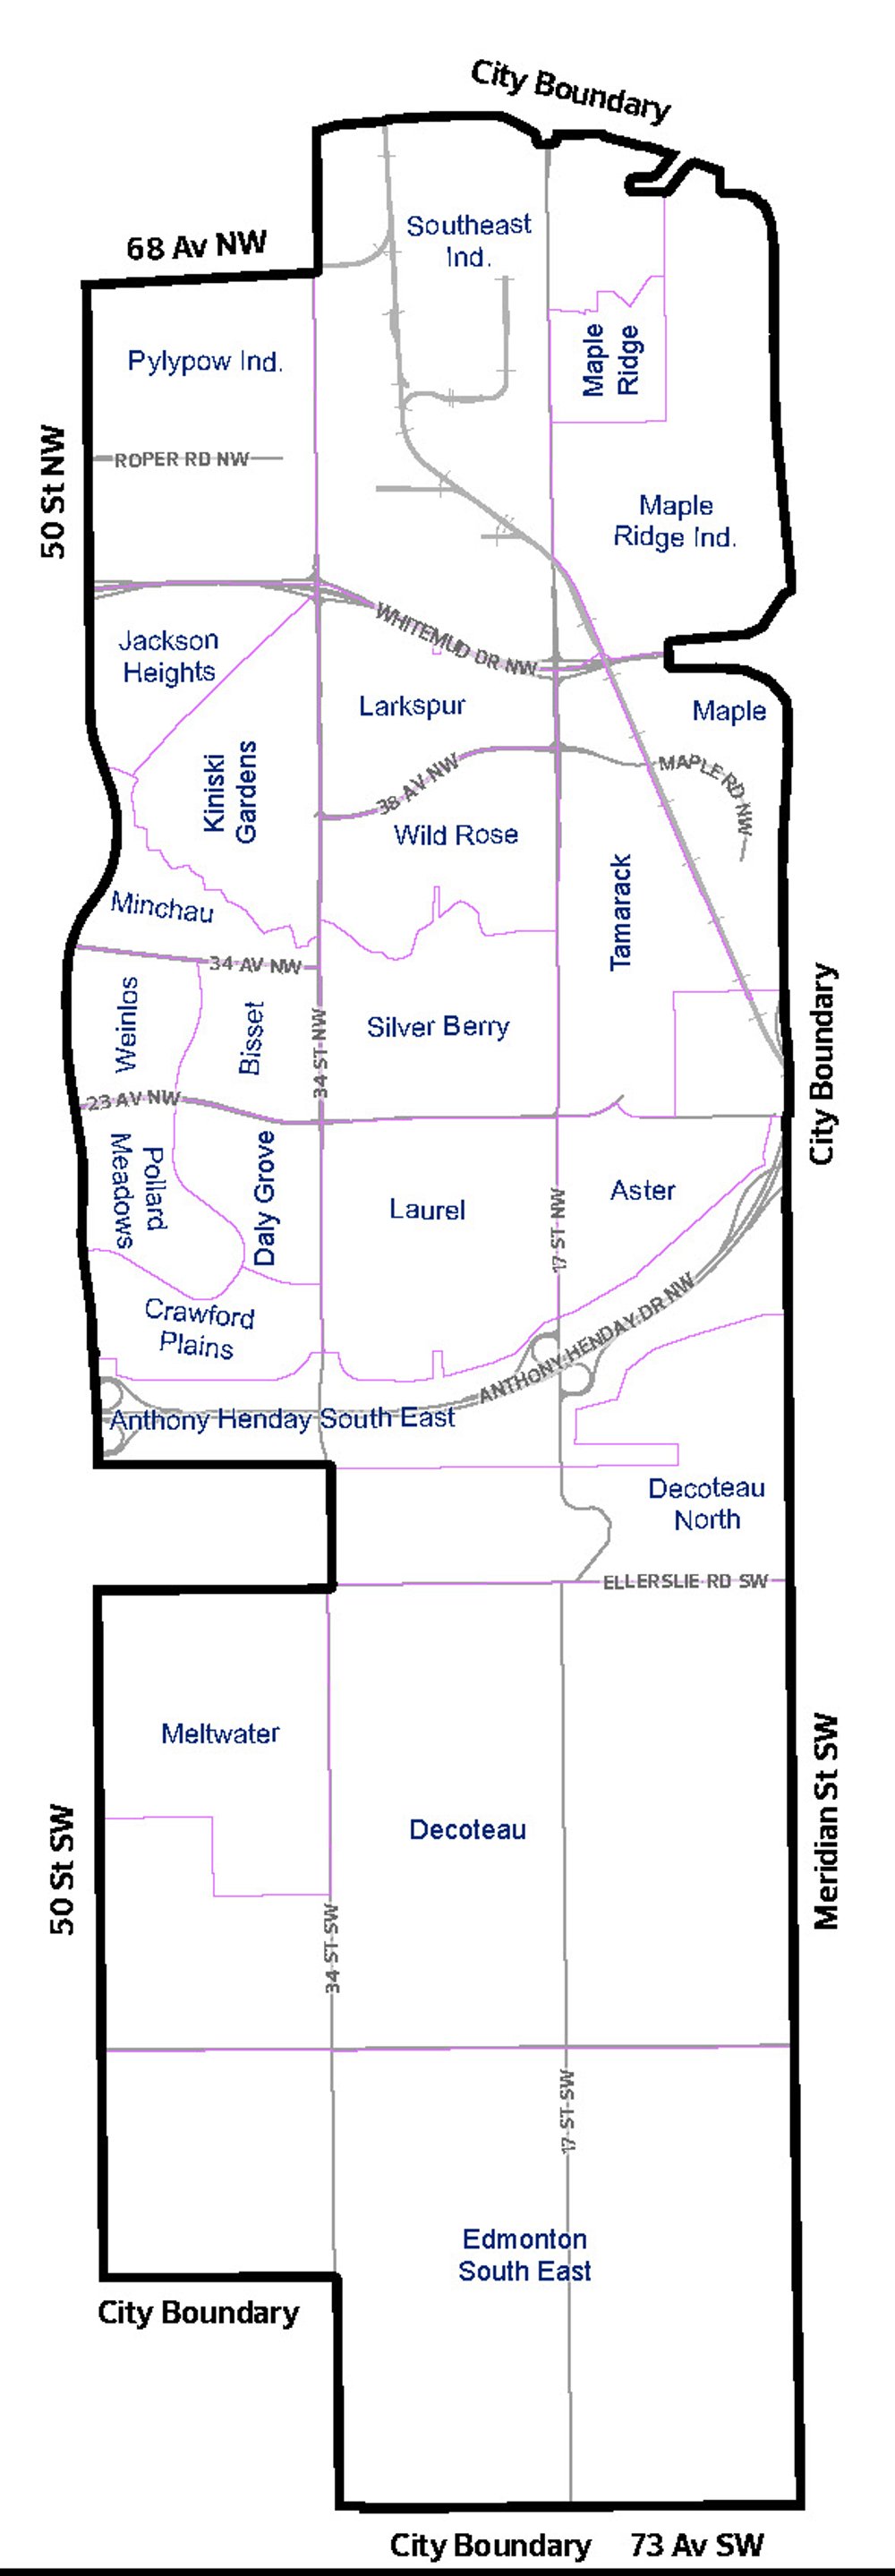 The boundaries are basically from Sherwood Park Freeway south to the City limits at 73 Avenue Southwest. And from 50 Street east to the Henday.